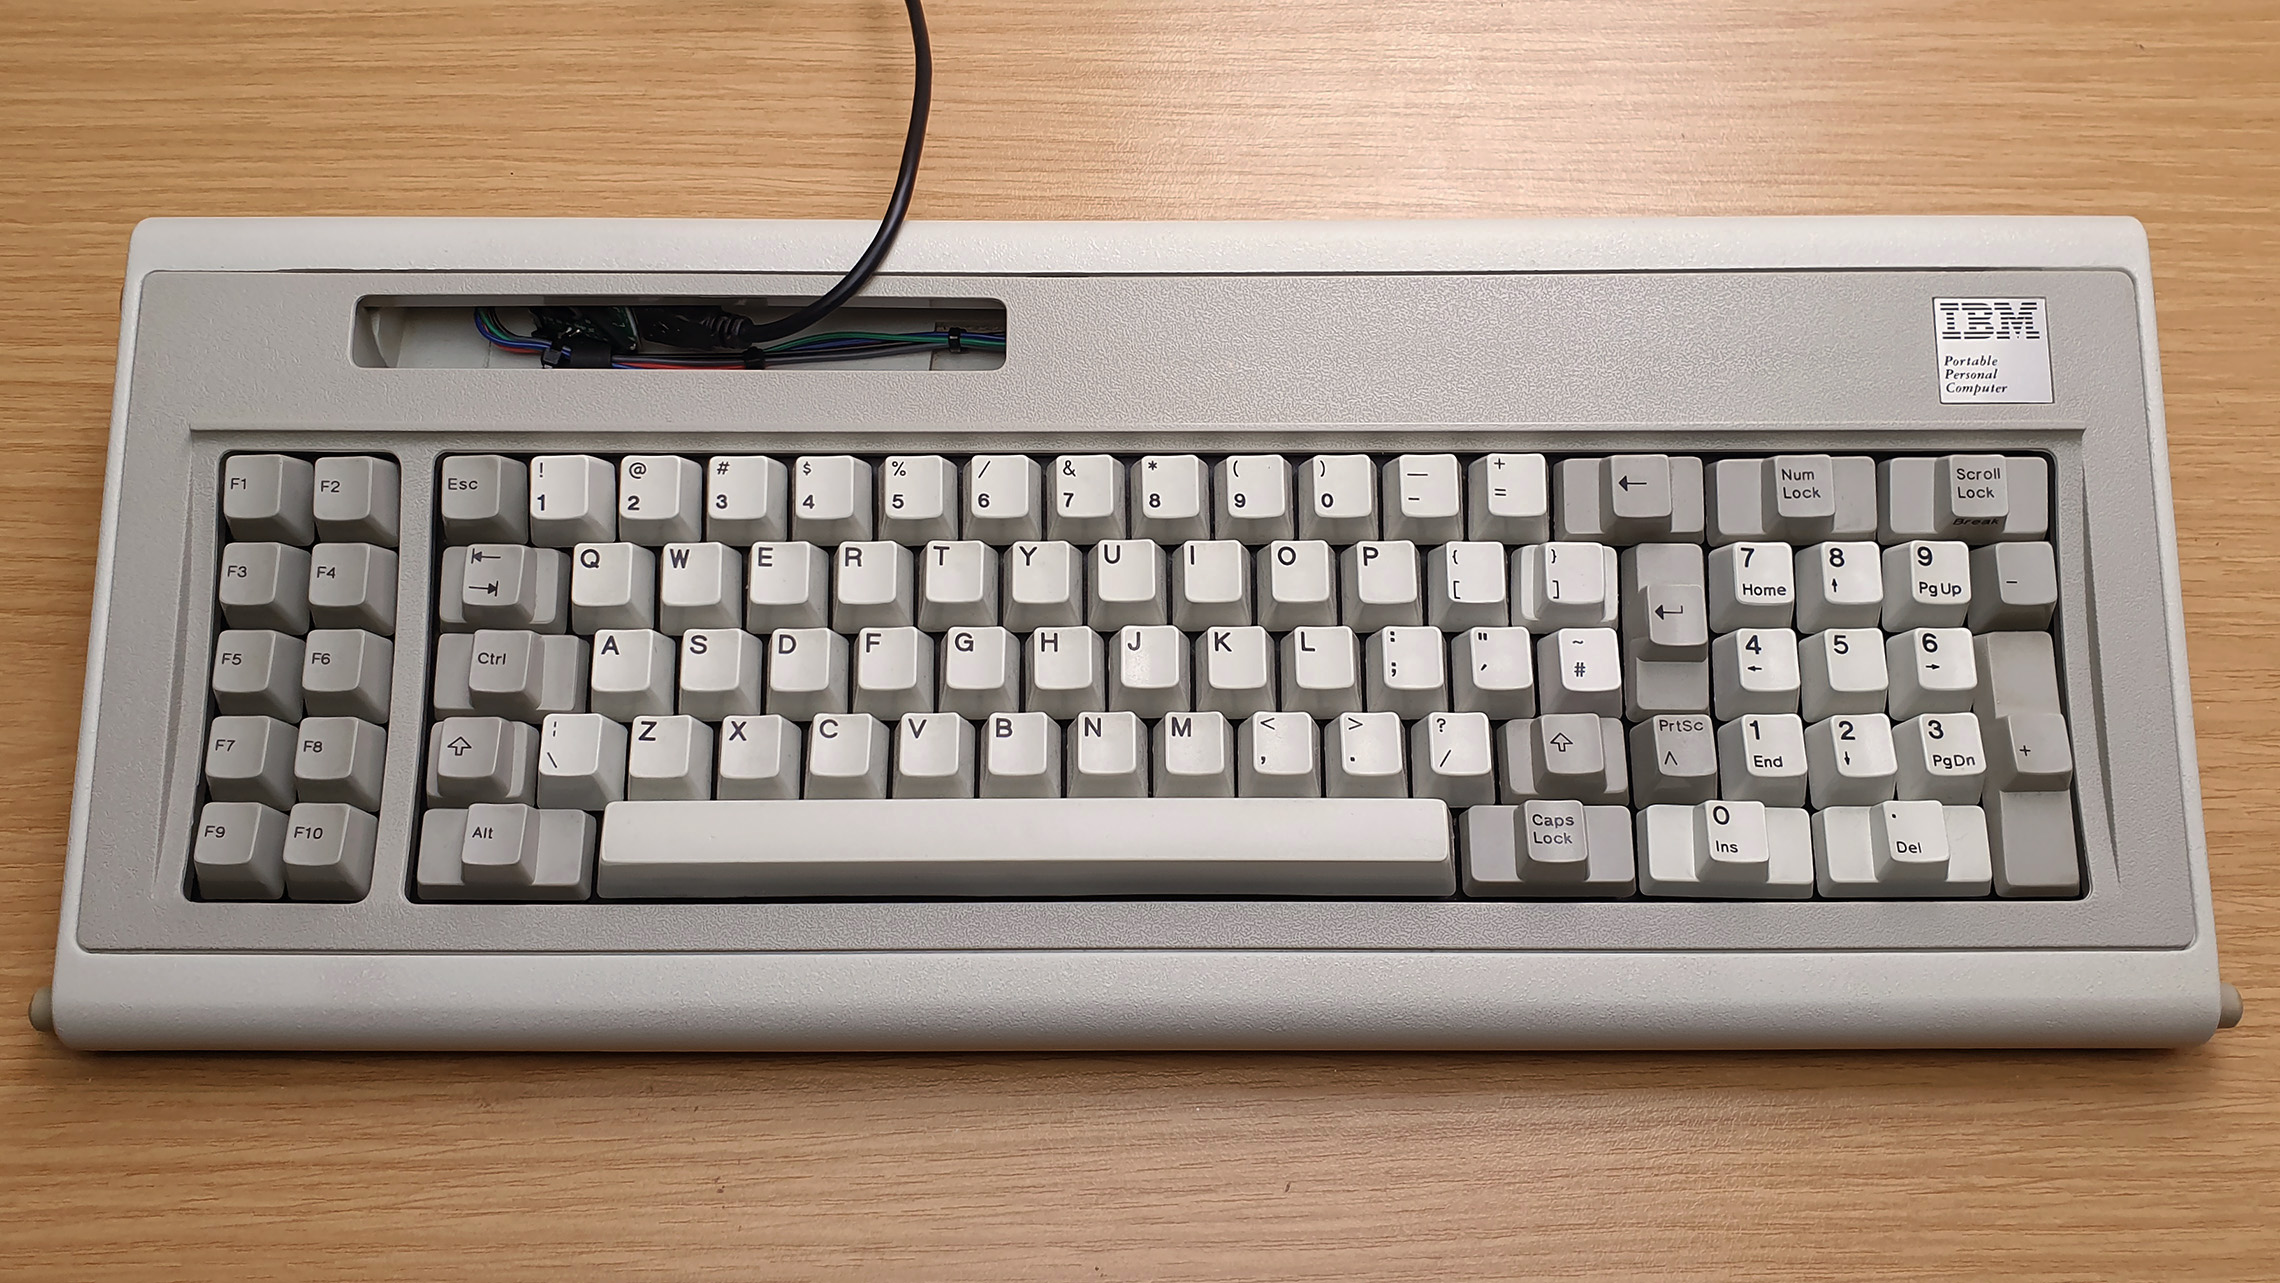 IBM Portable Personal Computer Keyboard<a class='source-link' href='/wiki?id=modelf#Sources'><sup>[ASK]</sup></a>